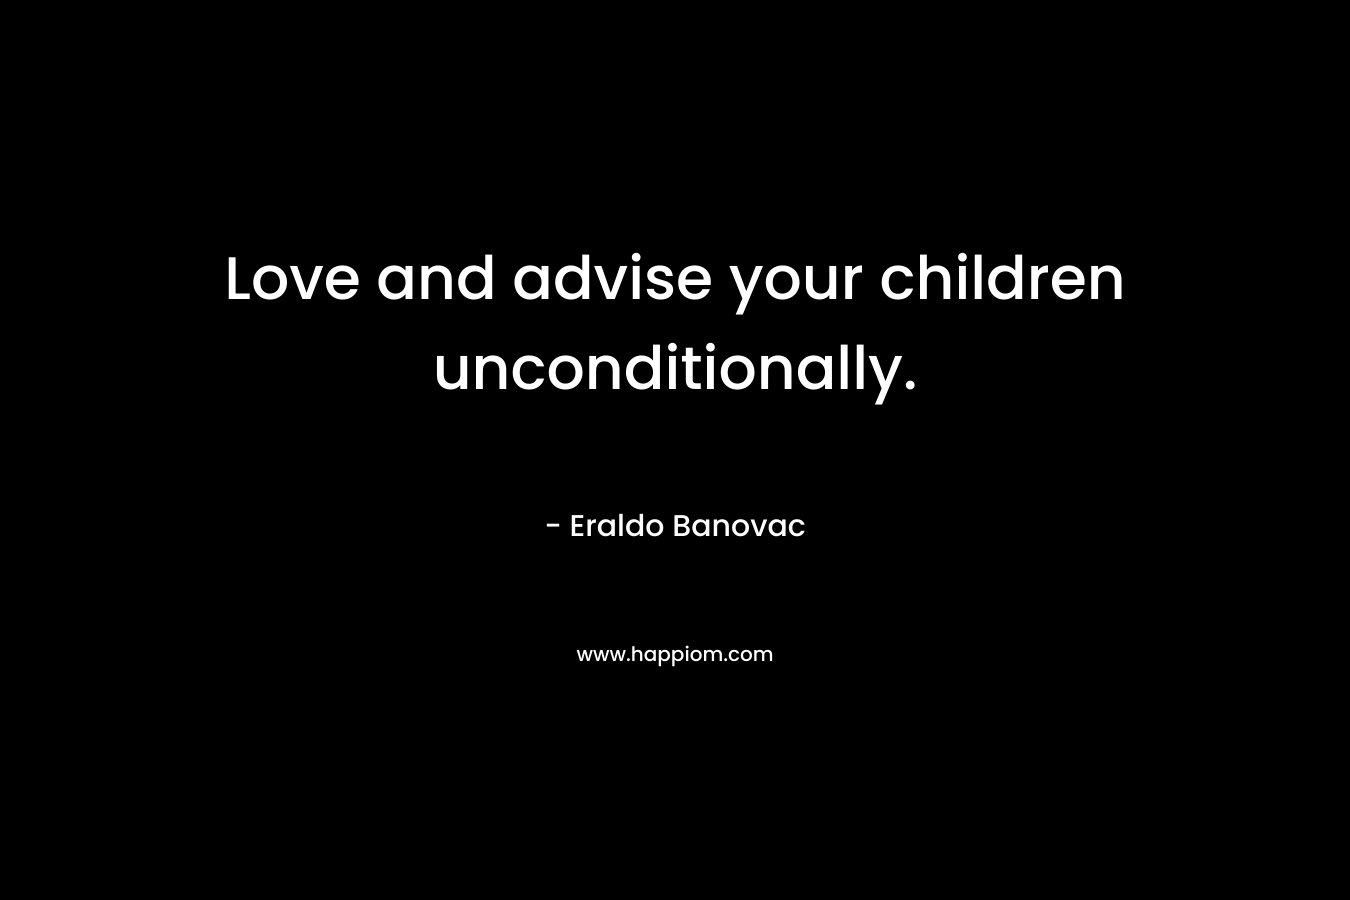 Love and advise your children unconditionally.